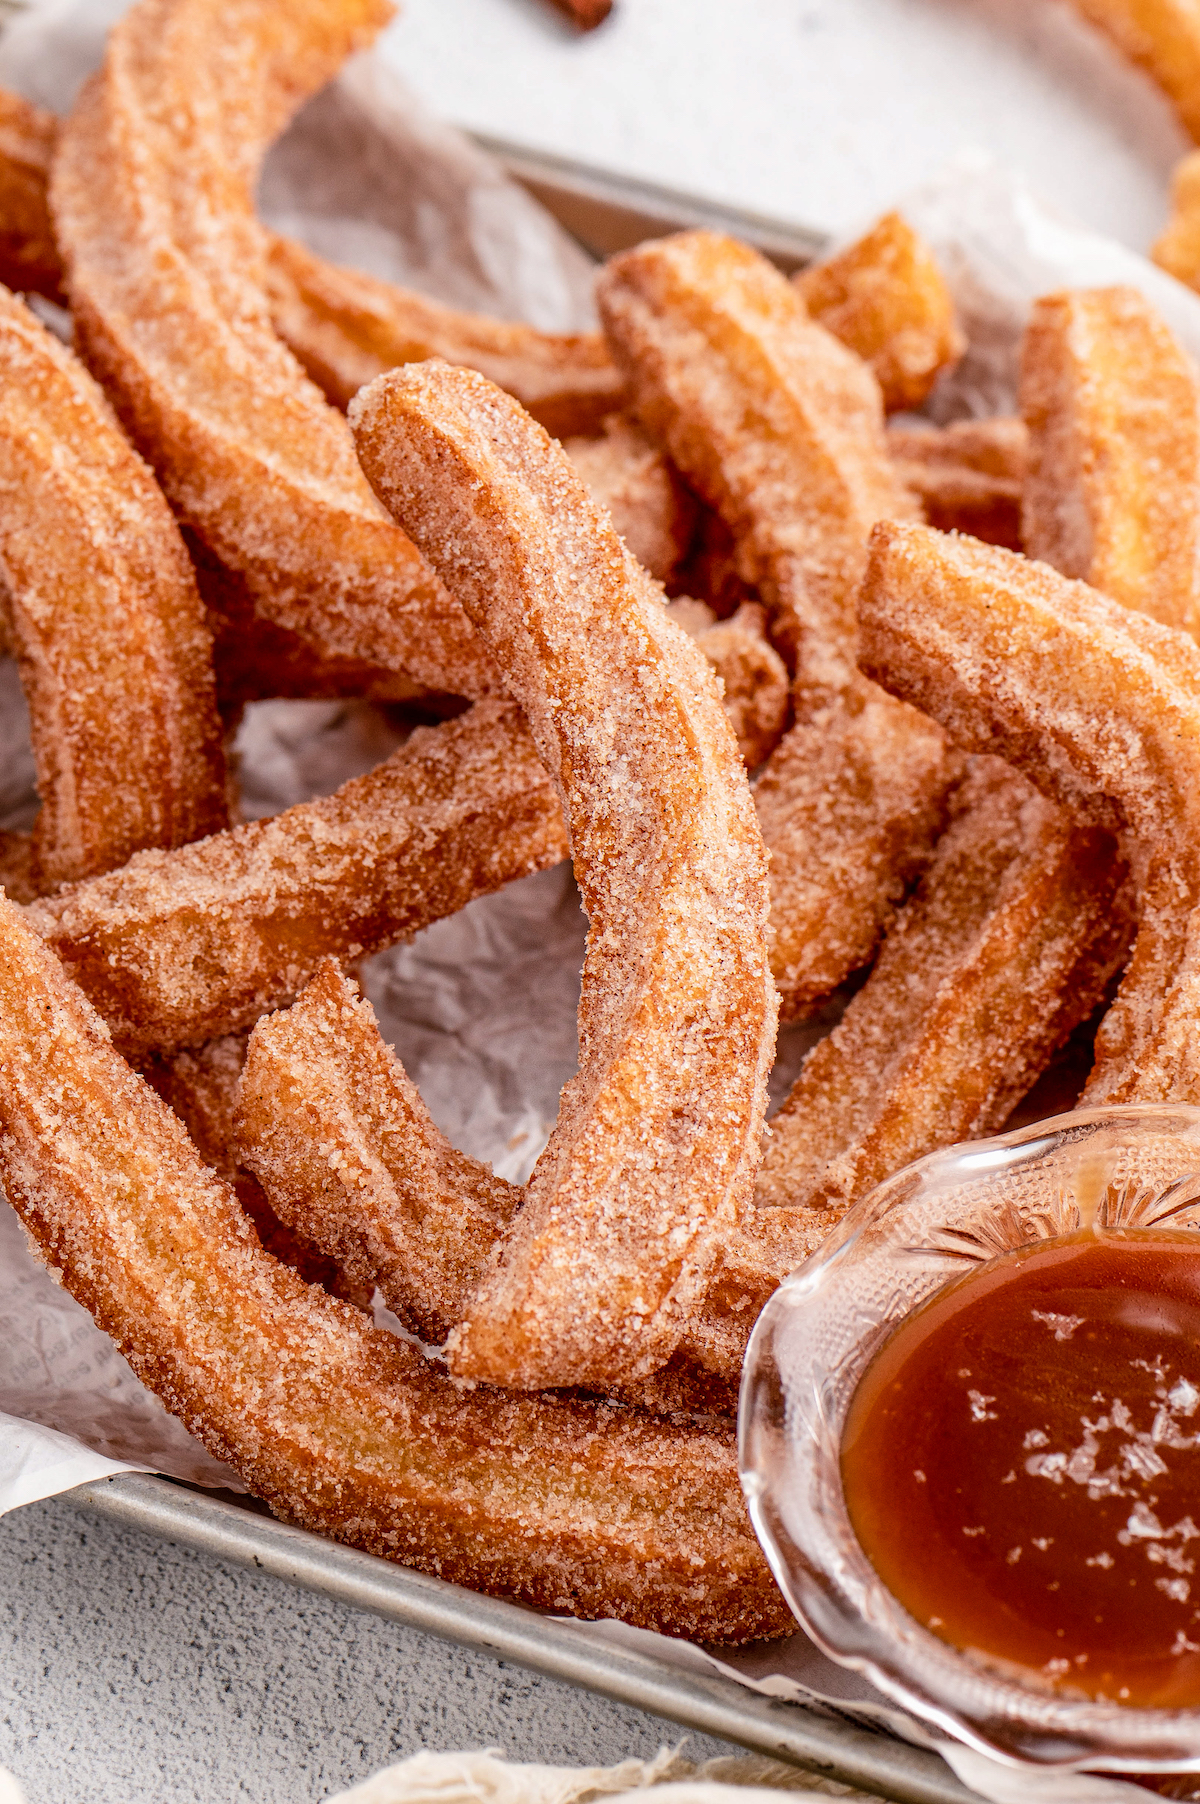 Close-up of homamde churros with caramel sauce on the side.